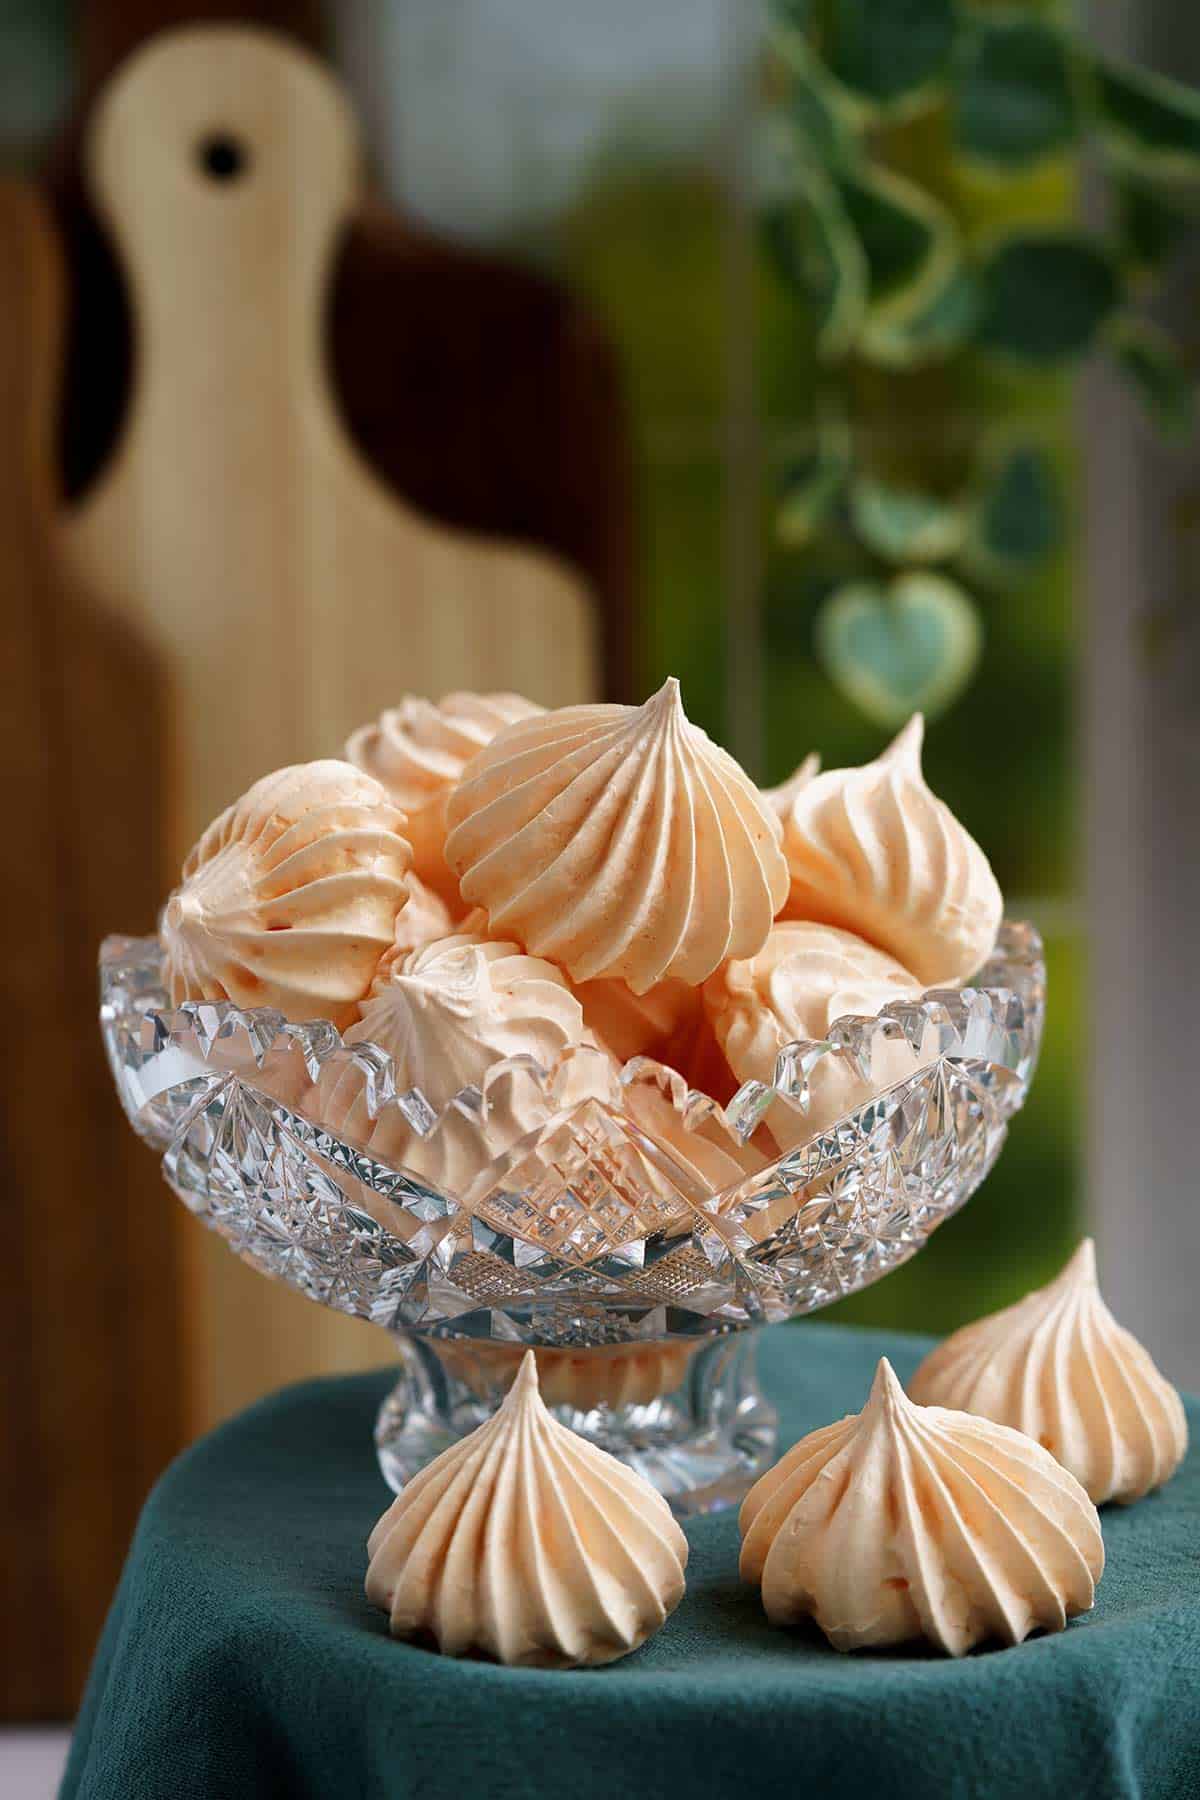 Full picture of a glass bowl with many tangerine meringue cookies inside.